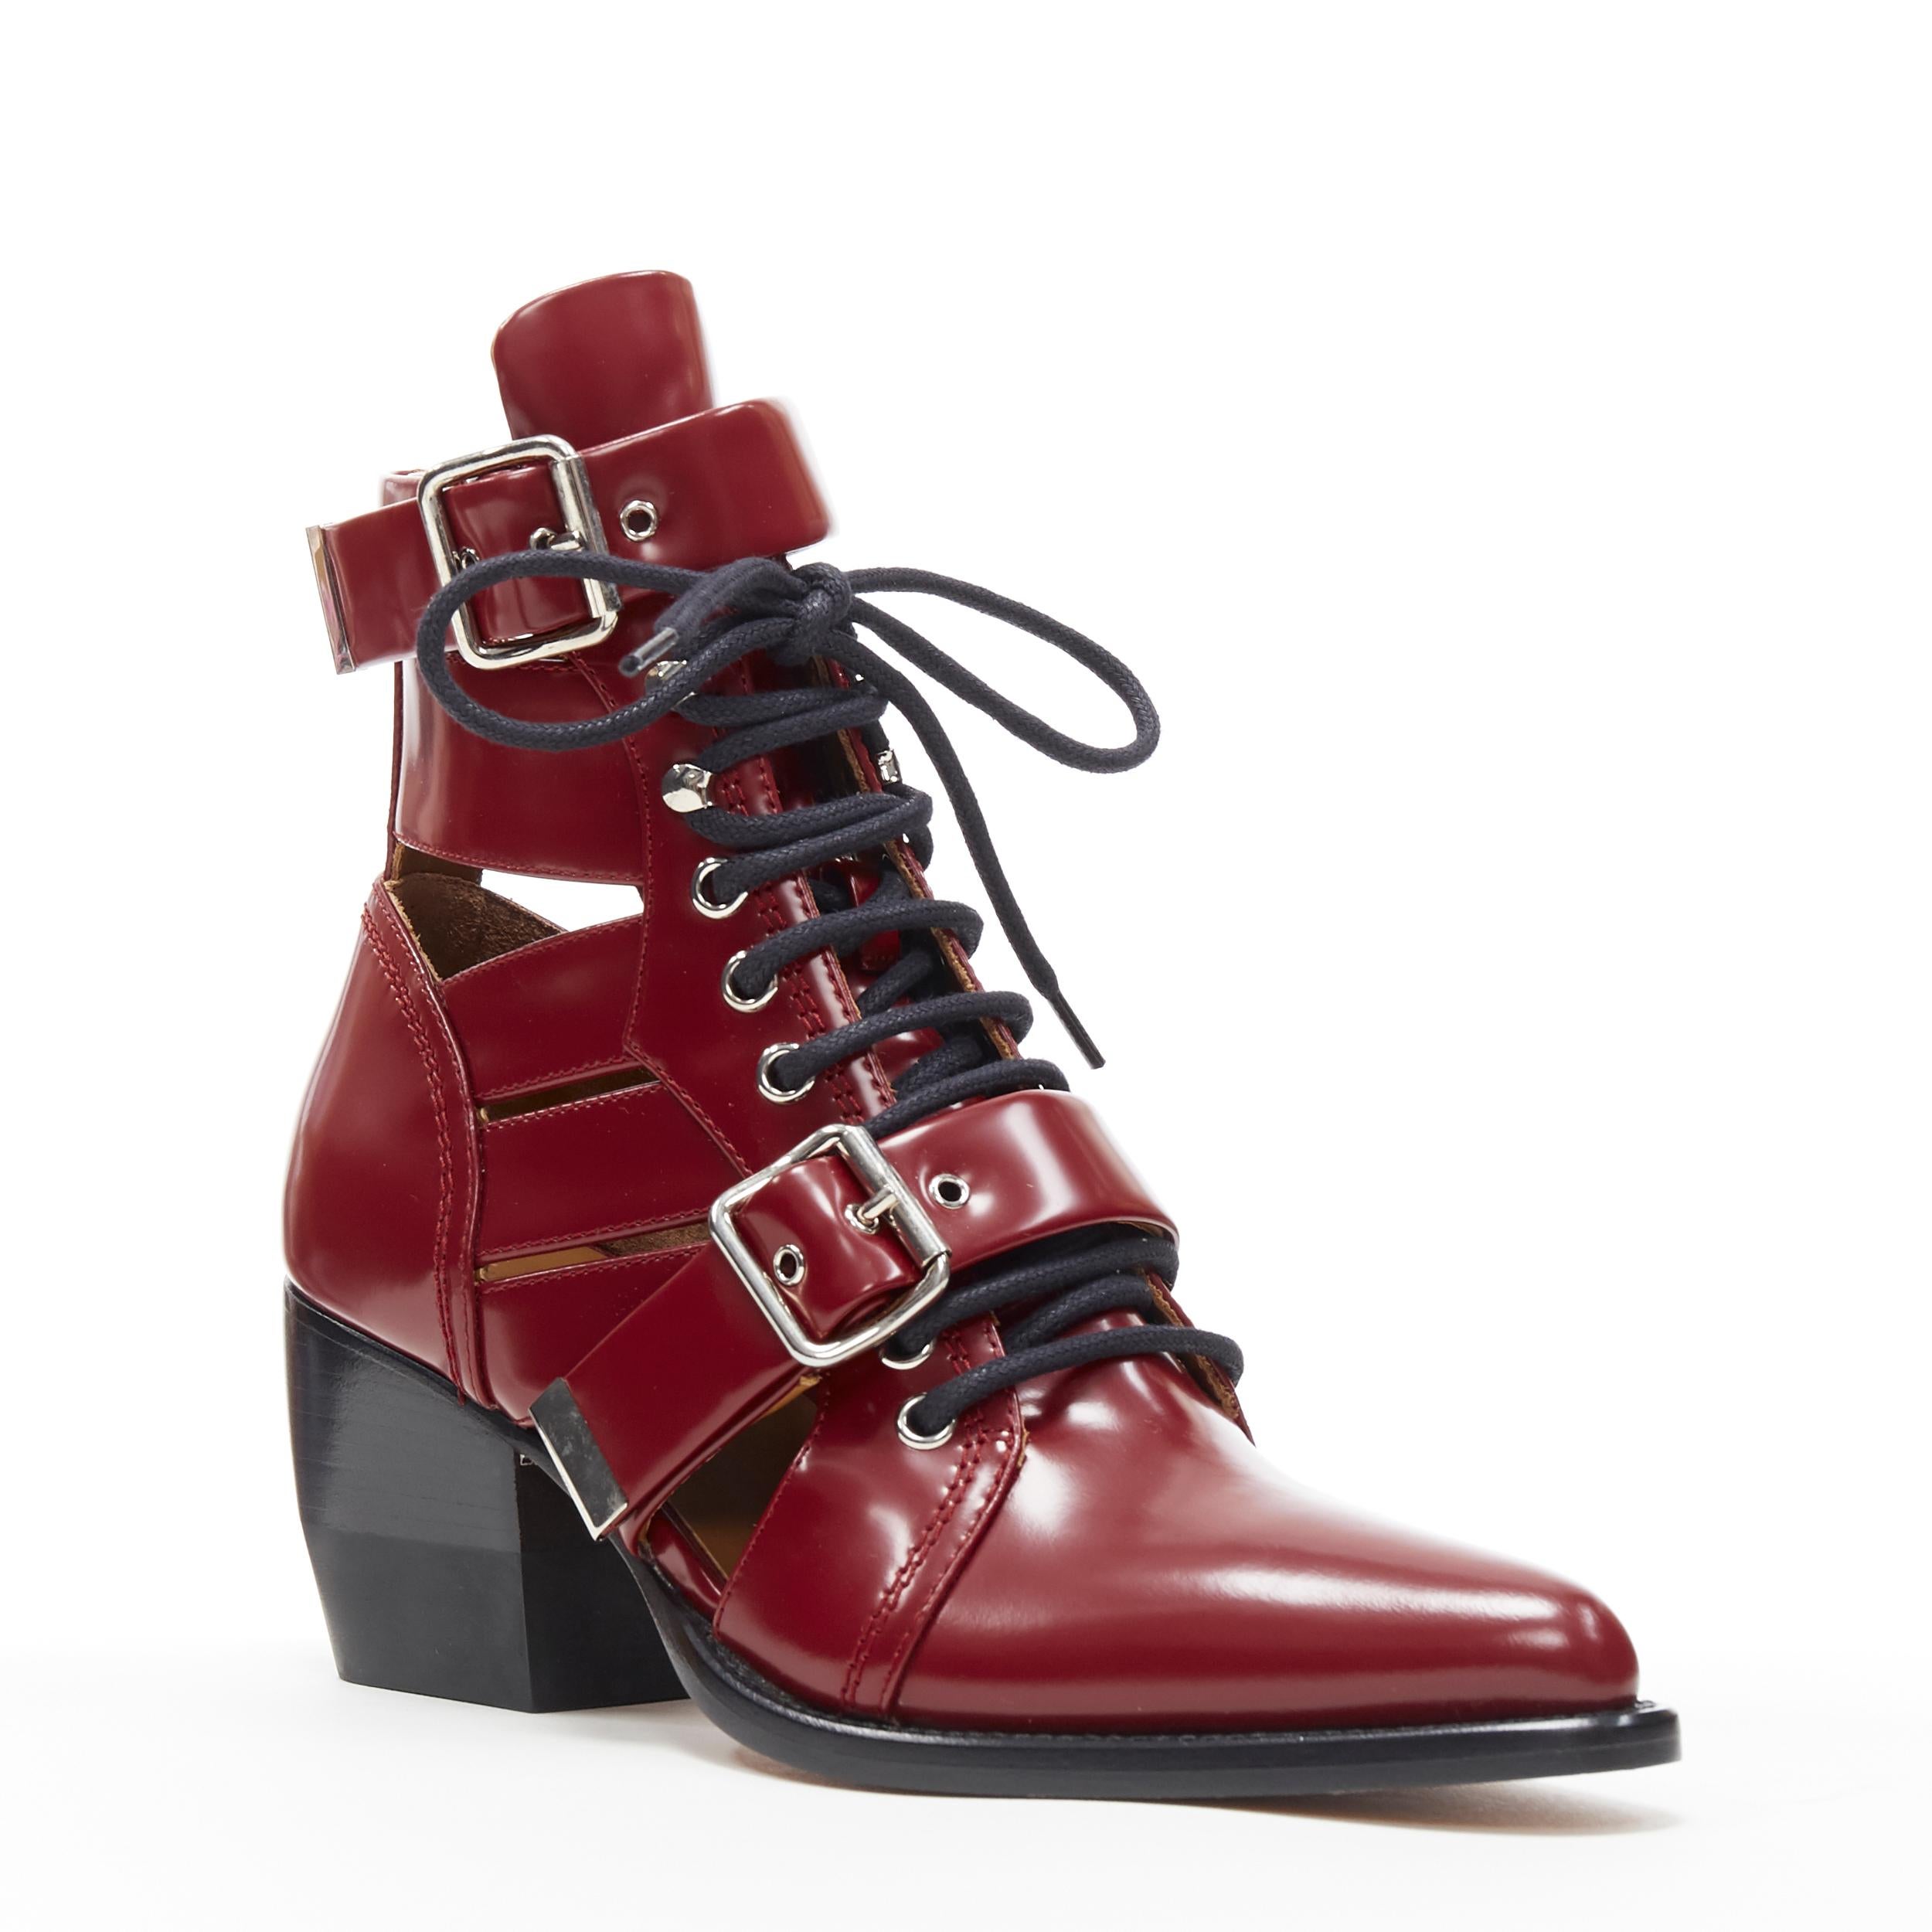 new CHLOE Rylee burgundy red leather cut out buckled pointy ankle boot EU38
Brand: Chloe
Model Name / Style: Rylee
Material: Leather
Color: Burgundy
Pattern: Solid
Closure: Lace up
Extra Detail: Signature Rylee boots by Chloe. Runway style. Ankle